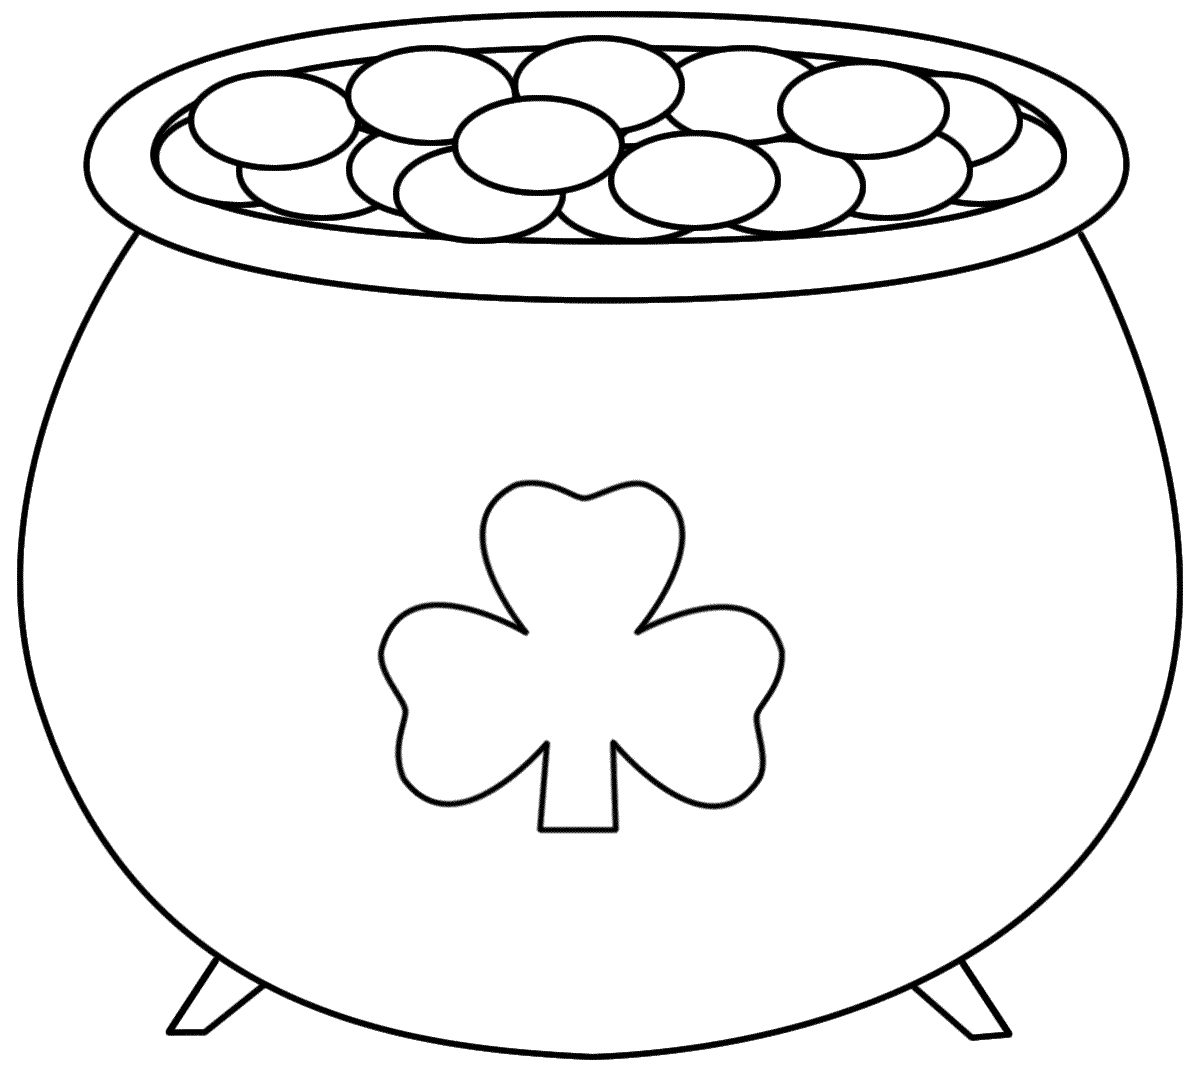 Pot+Of+Gold+Printable | Pot Of Gold - Coloring Pages | Saint - Free Printable Pot Of Gold Coloring Pages